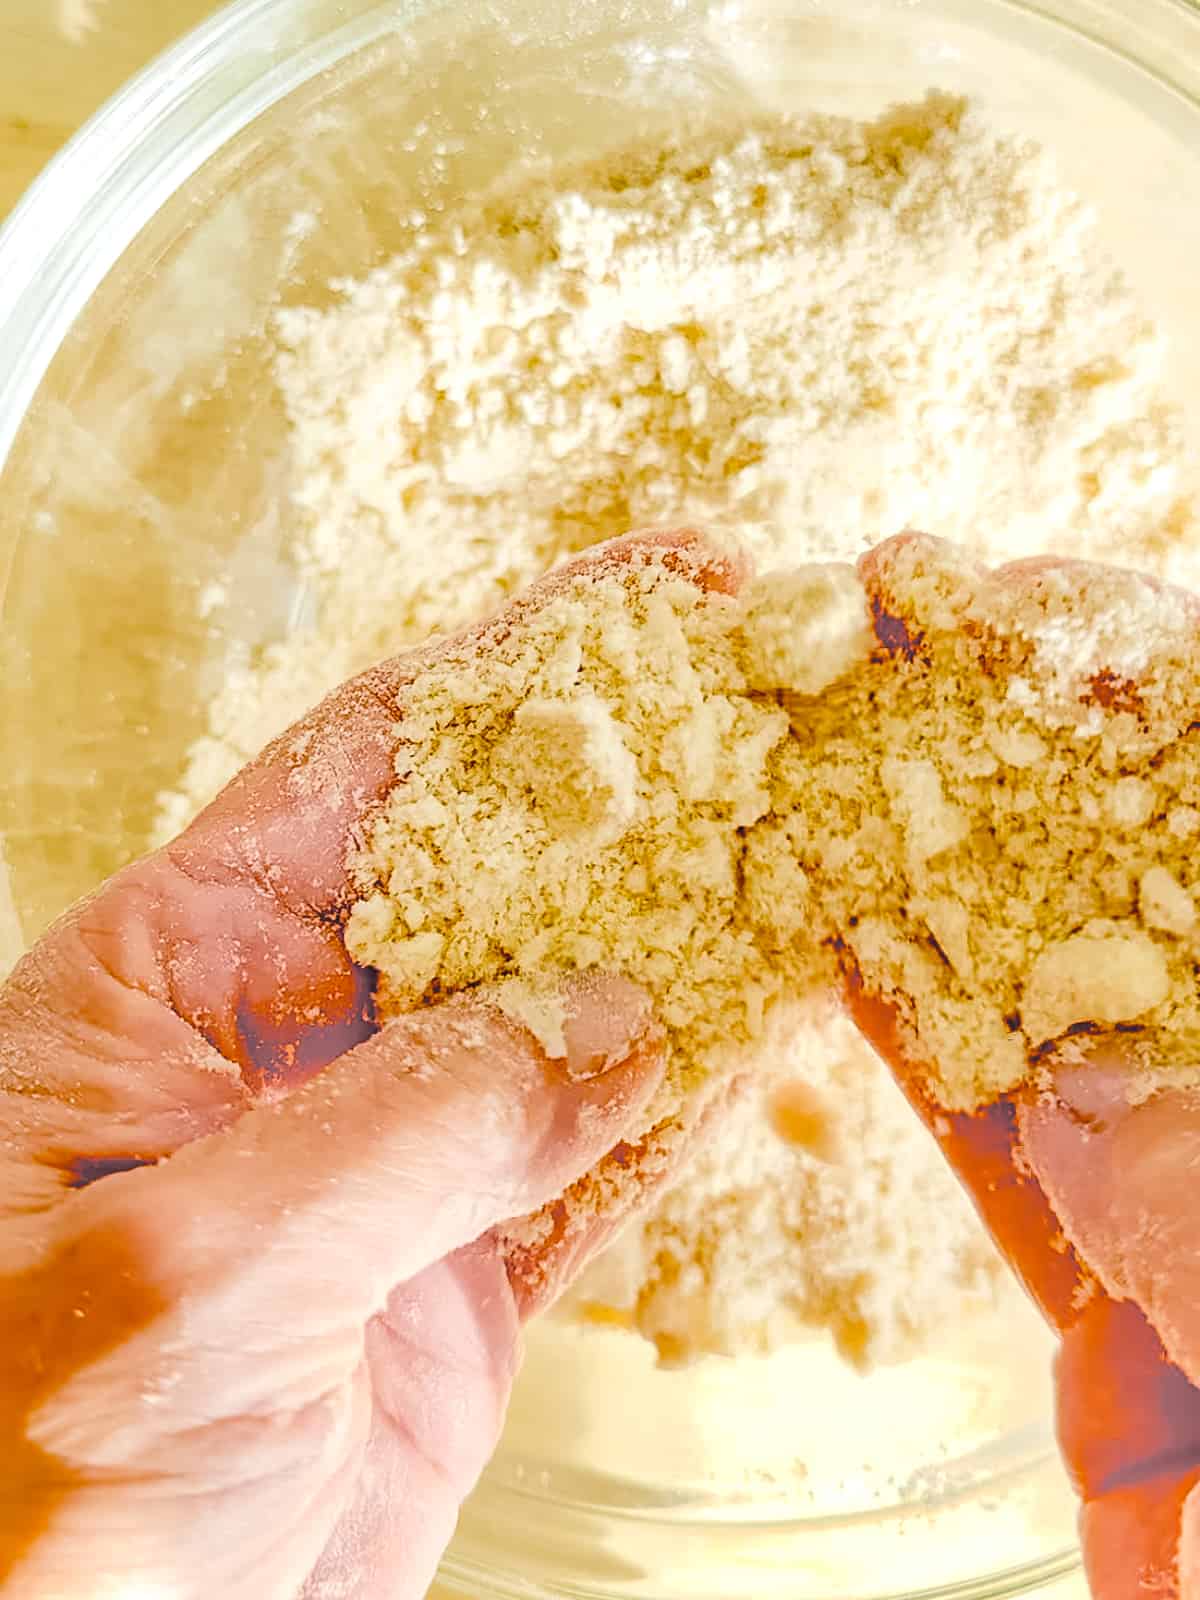 Fingers showing butter incorporated into biscuit dry ingredients.